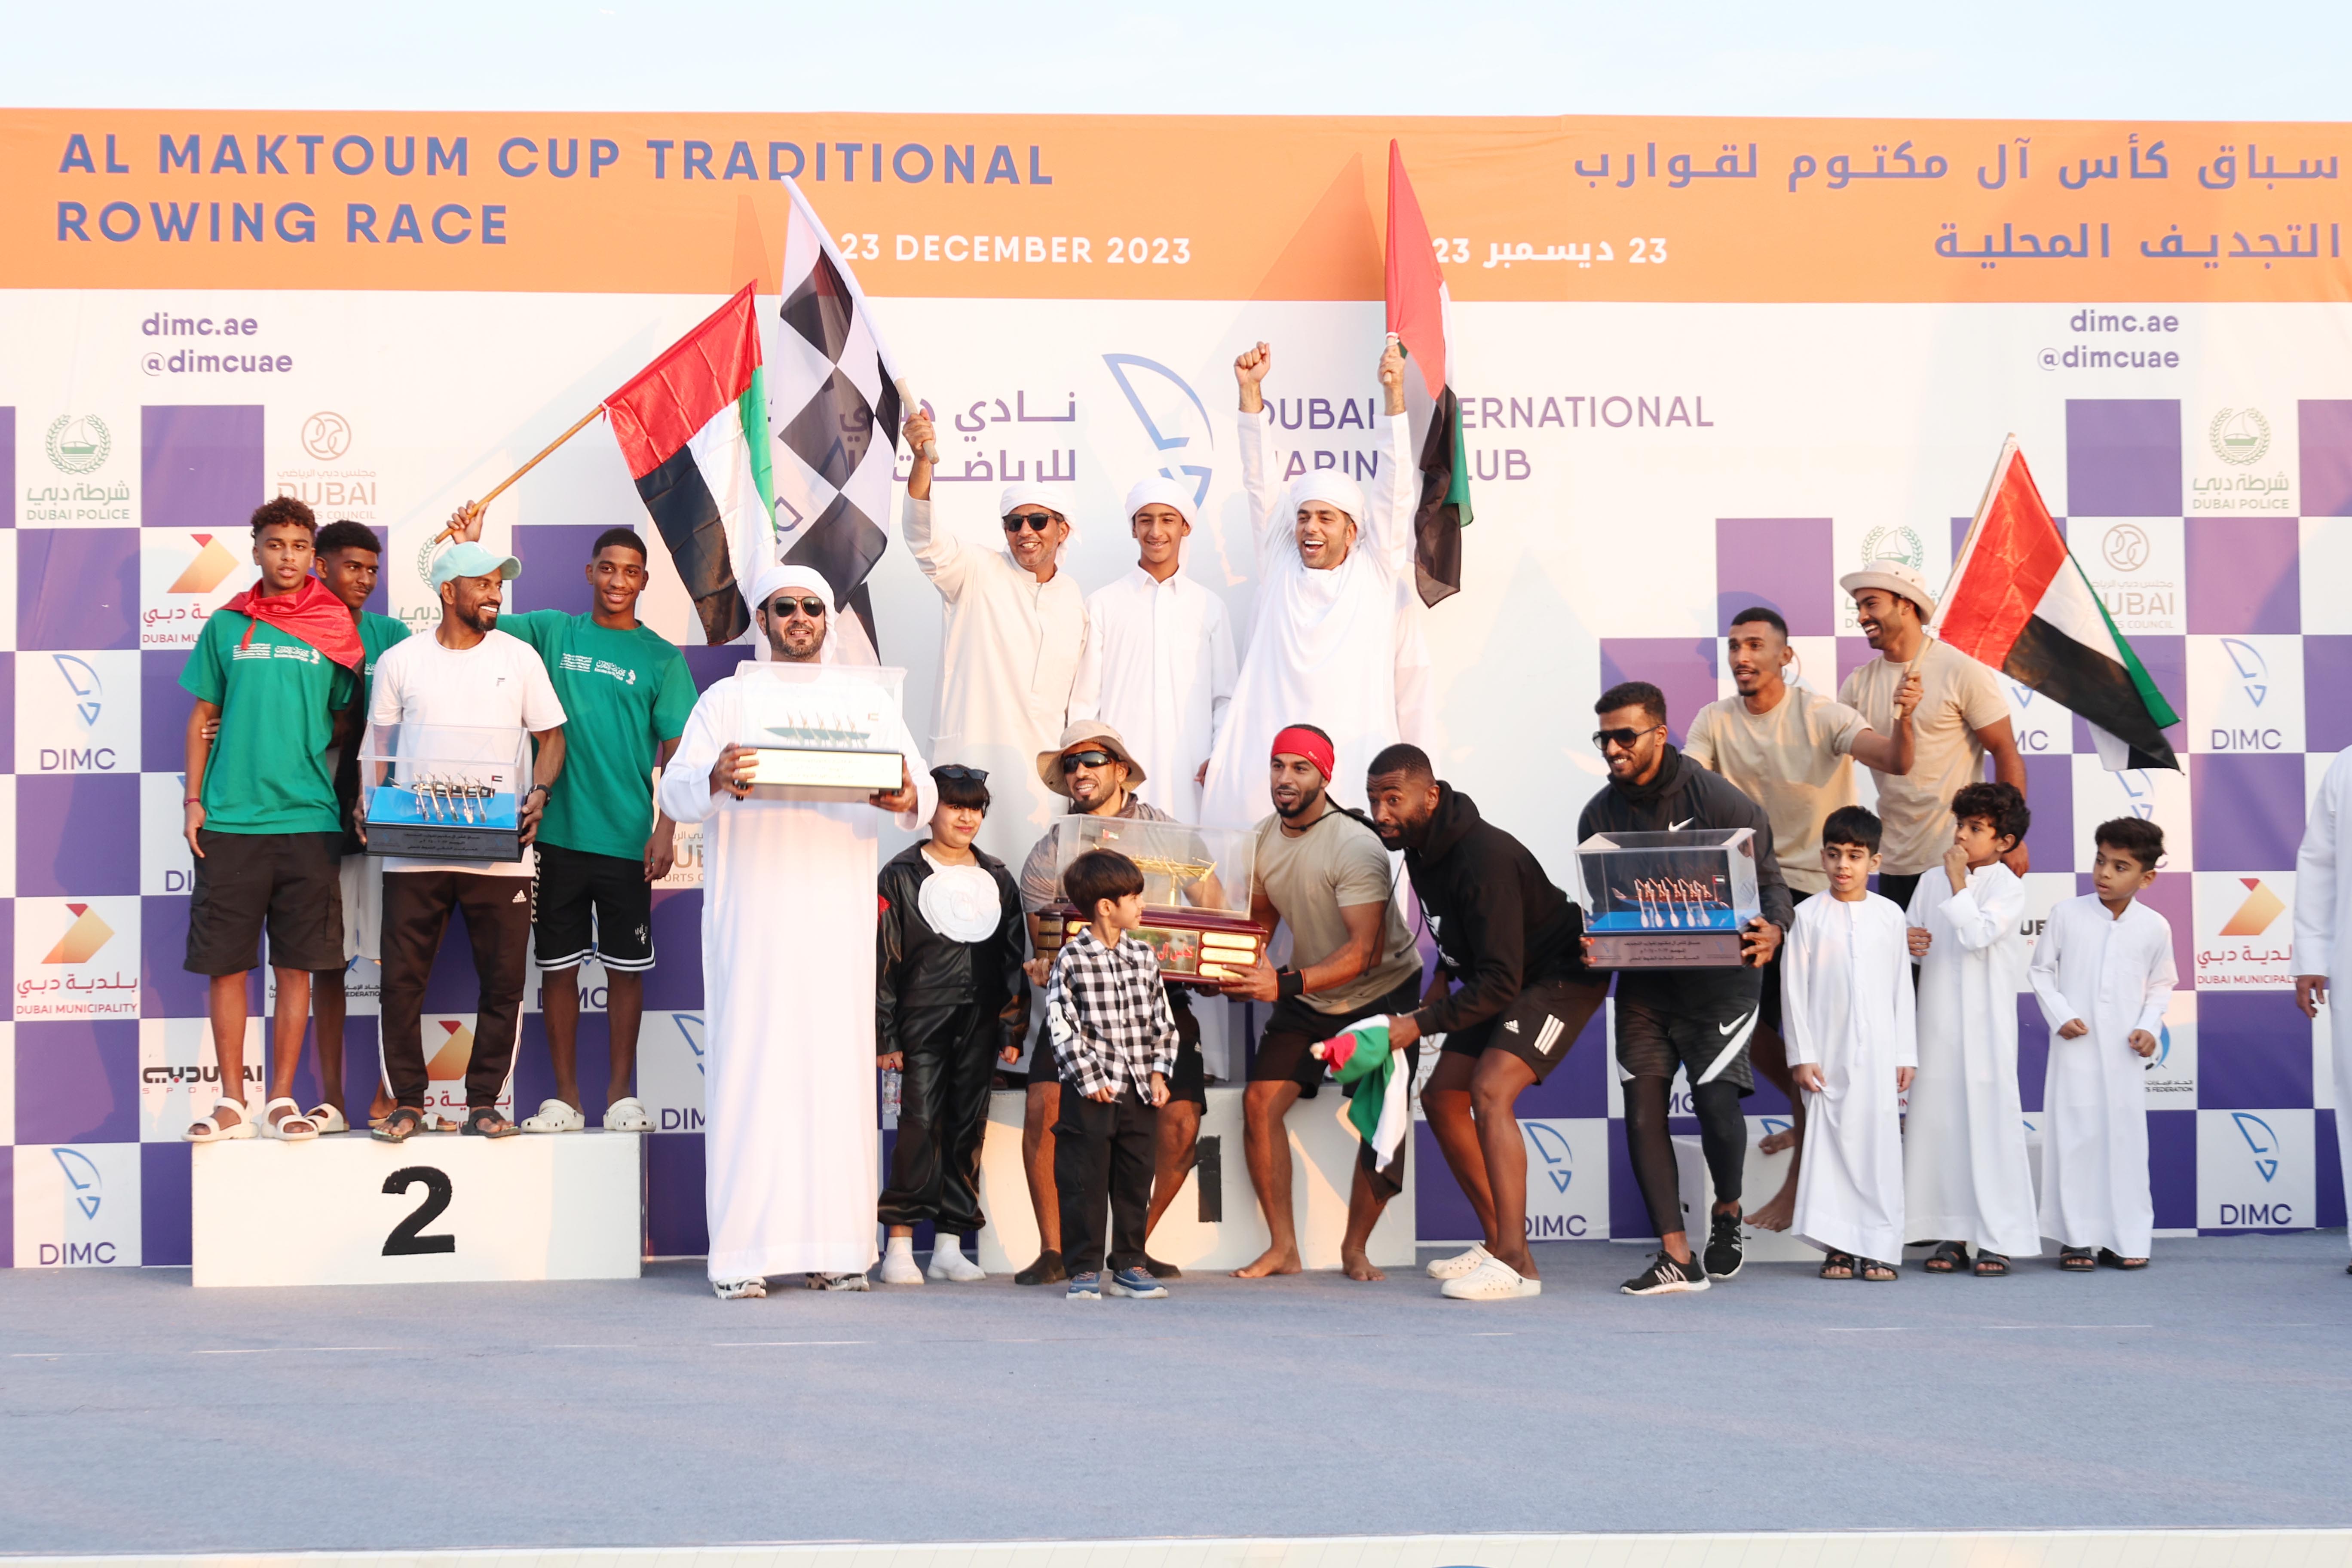 Al Asifa 36 and Belarab 44: Champions of the 27th Edition of the Al Maktoum Cup